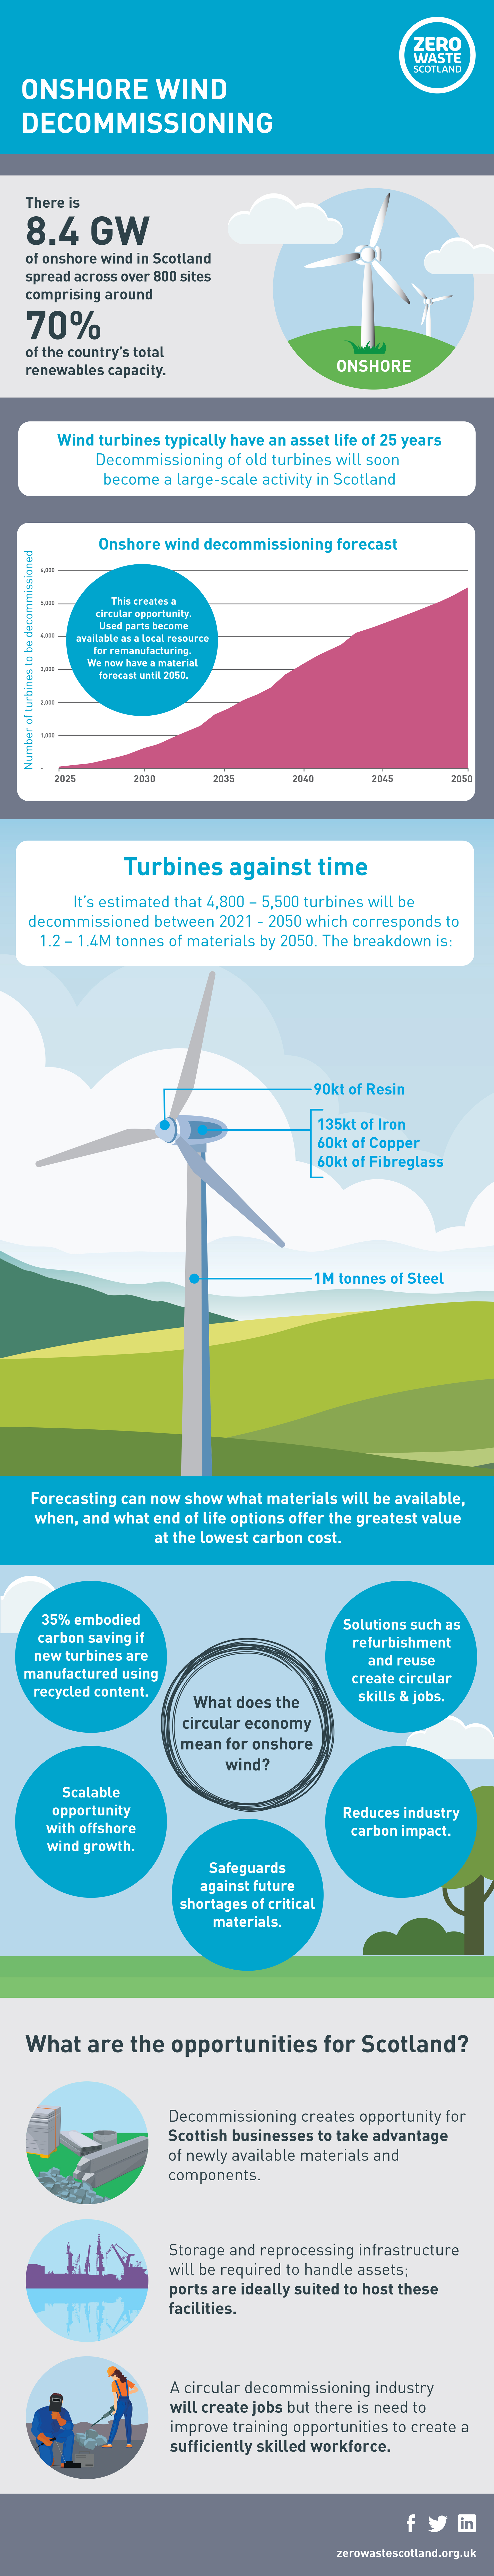 Infographic - The future of onshore wind decommissioning in Scotland